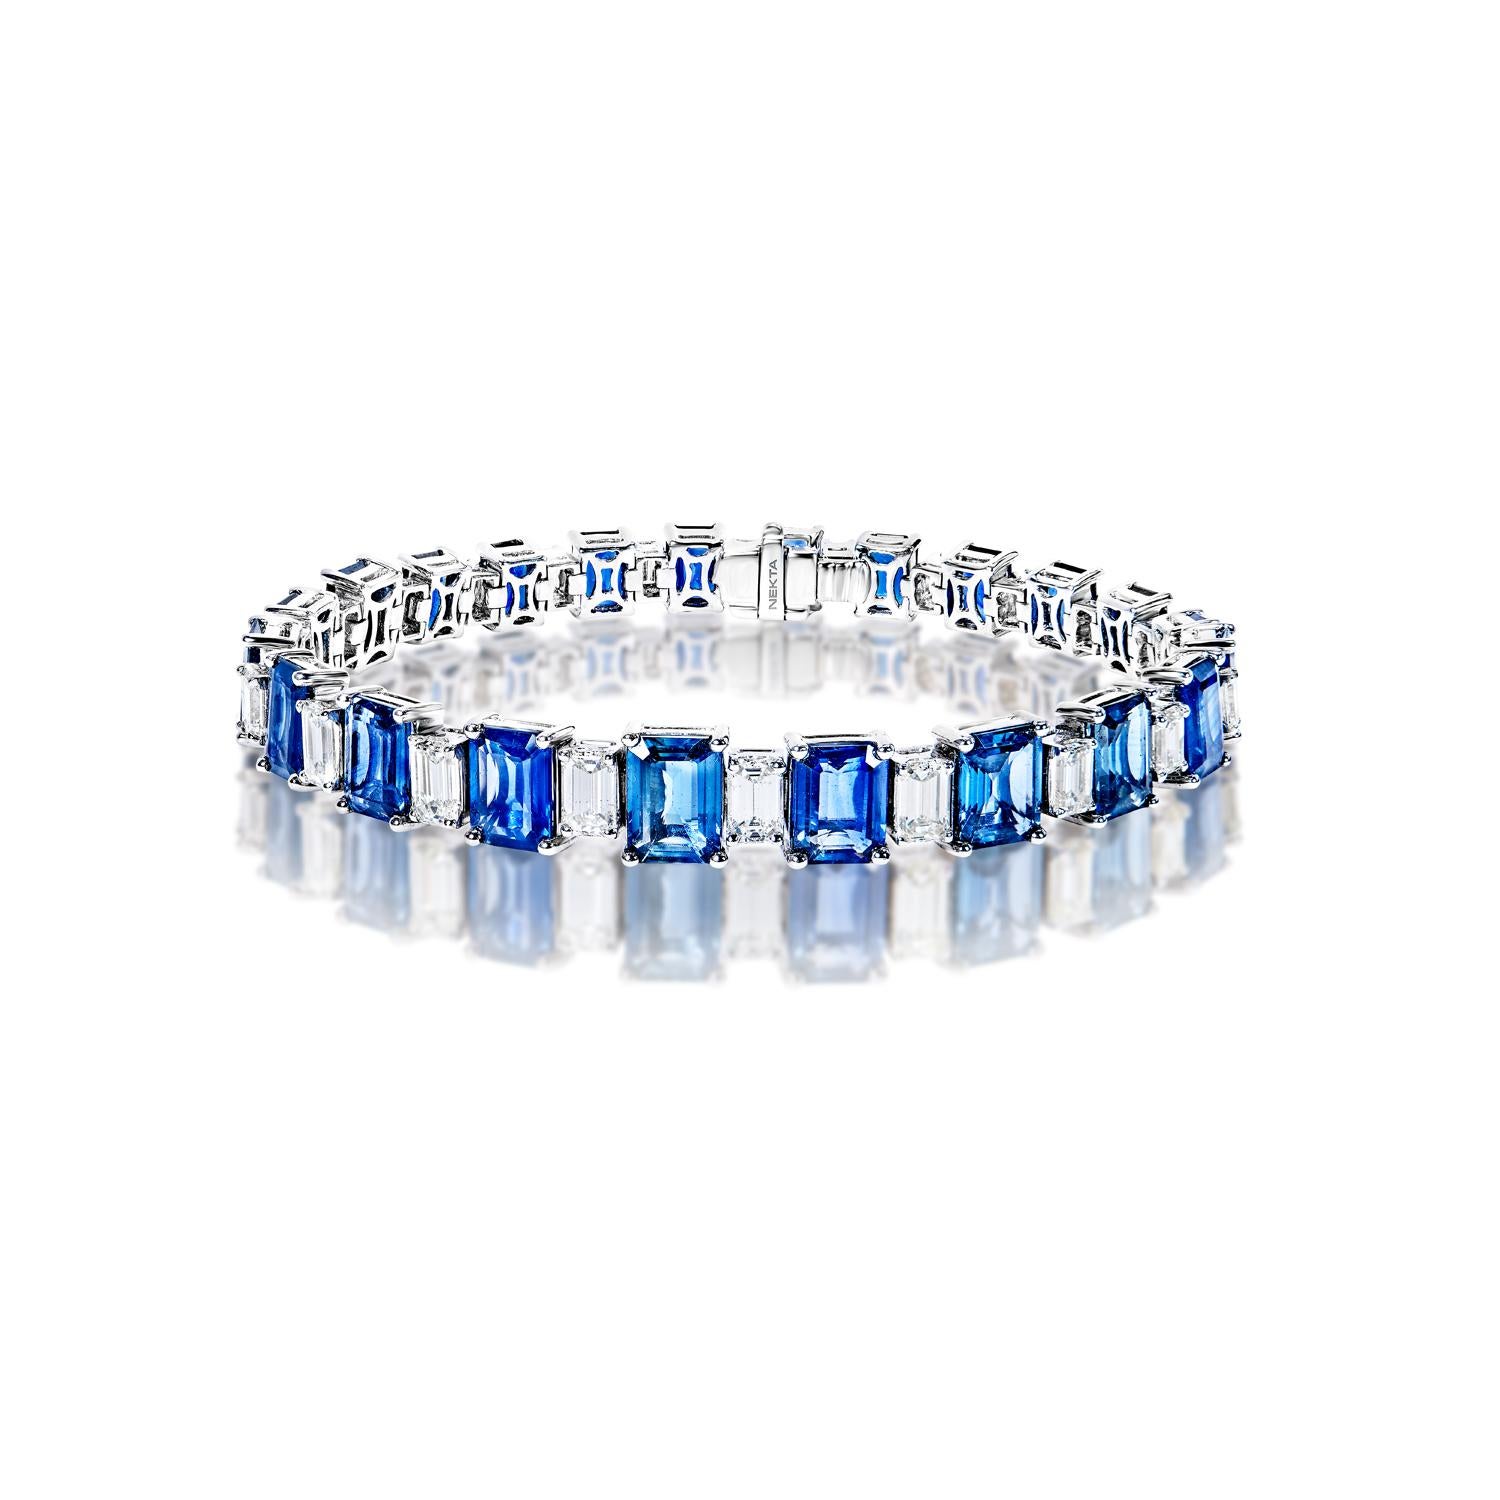 The  DALLAS 28.38 Carat Single Row Diamond Bracelet features SAPPHIRES AND DIAMONDS brilliants weighing a total of approximately 28.38 carats.

Style:
Sapphires:
Carats: 23.12 Carats
Color: Blue
Stone: Sapphire
Stone Shape: Emerald